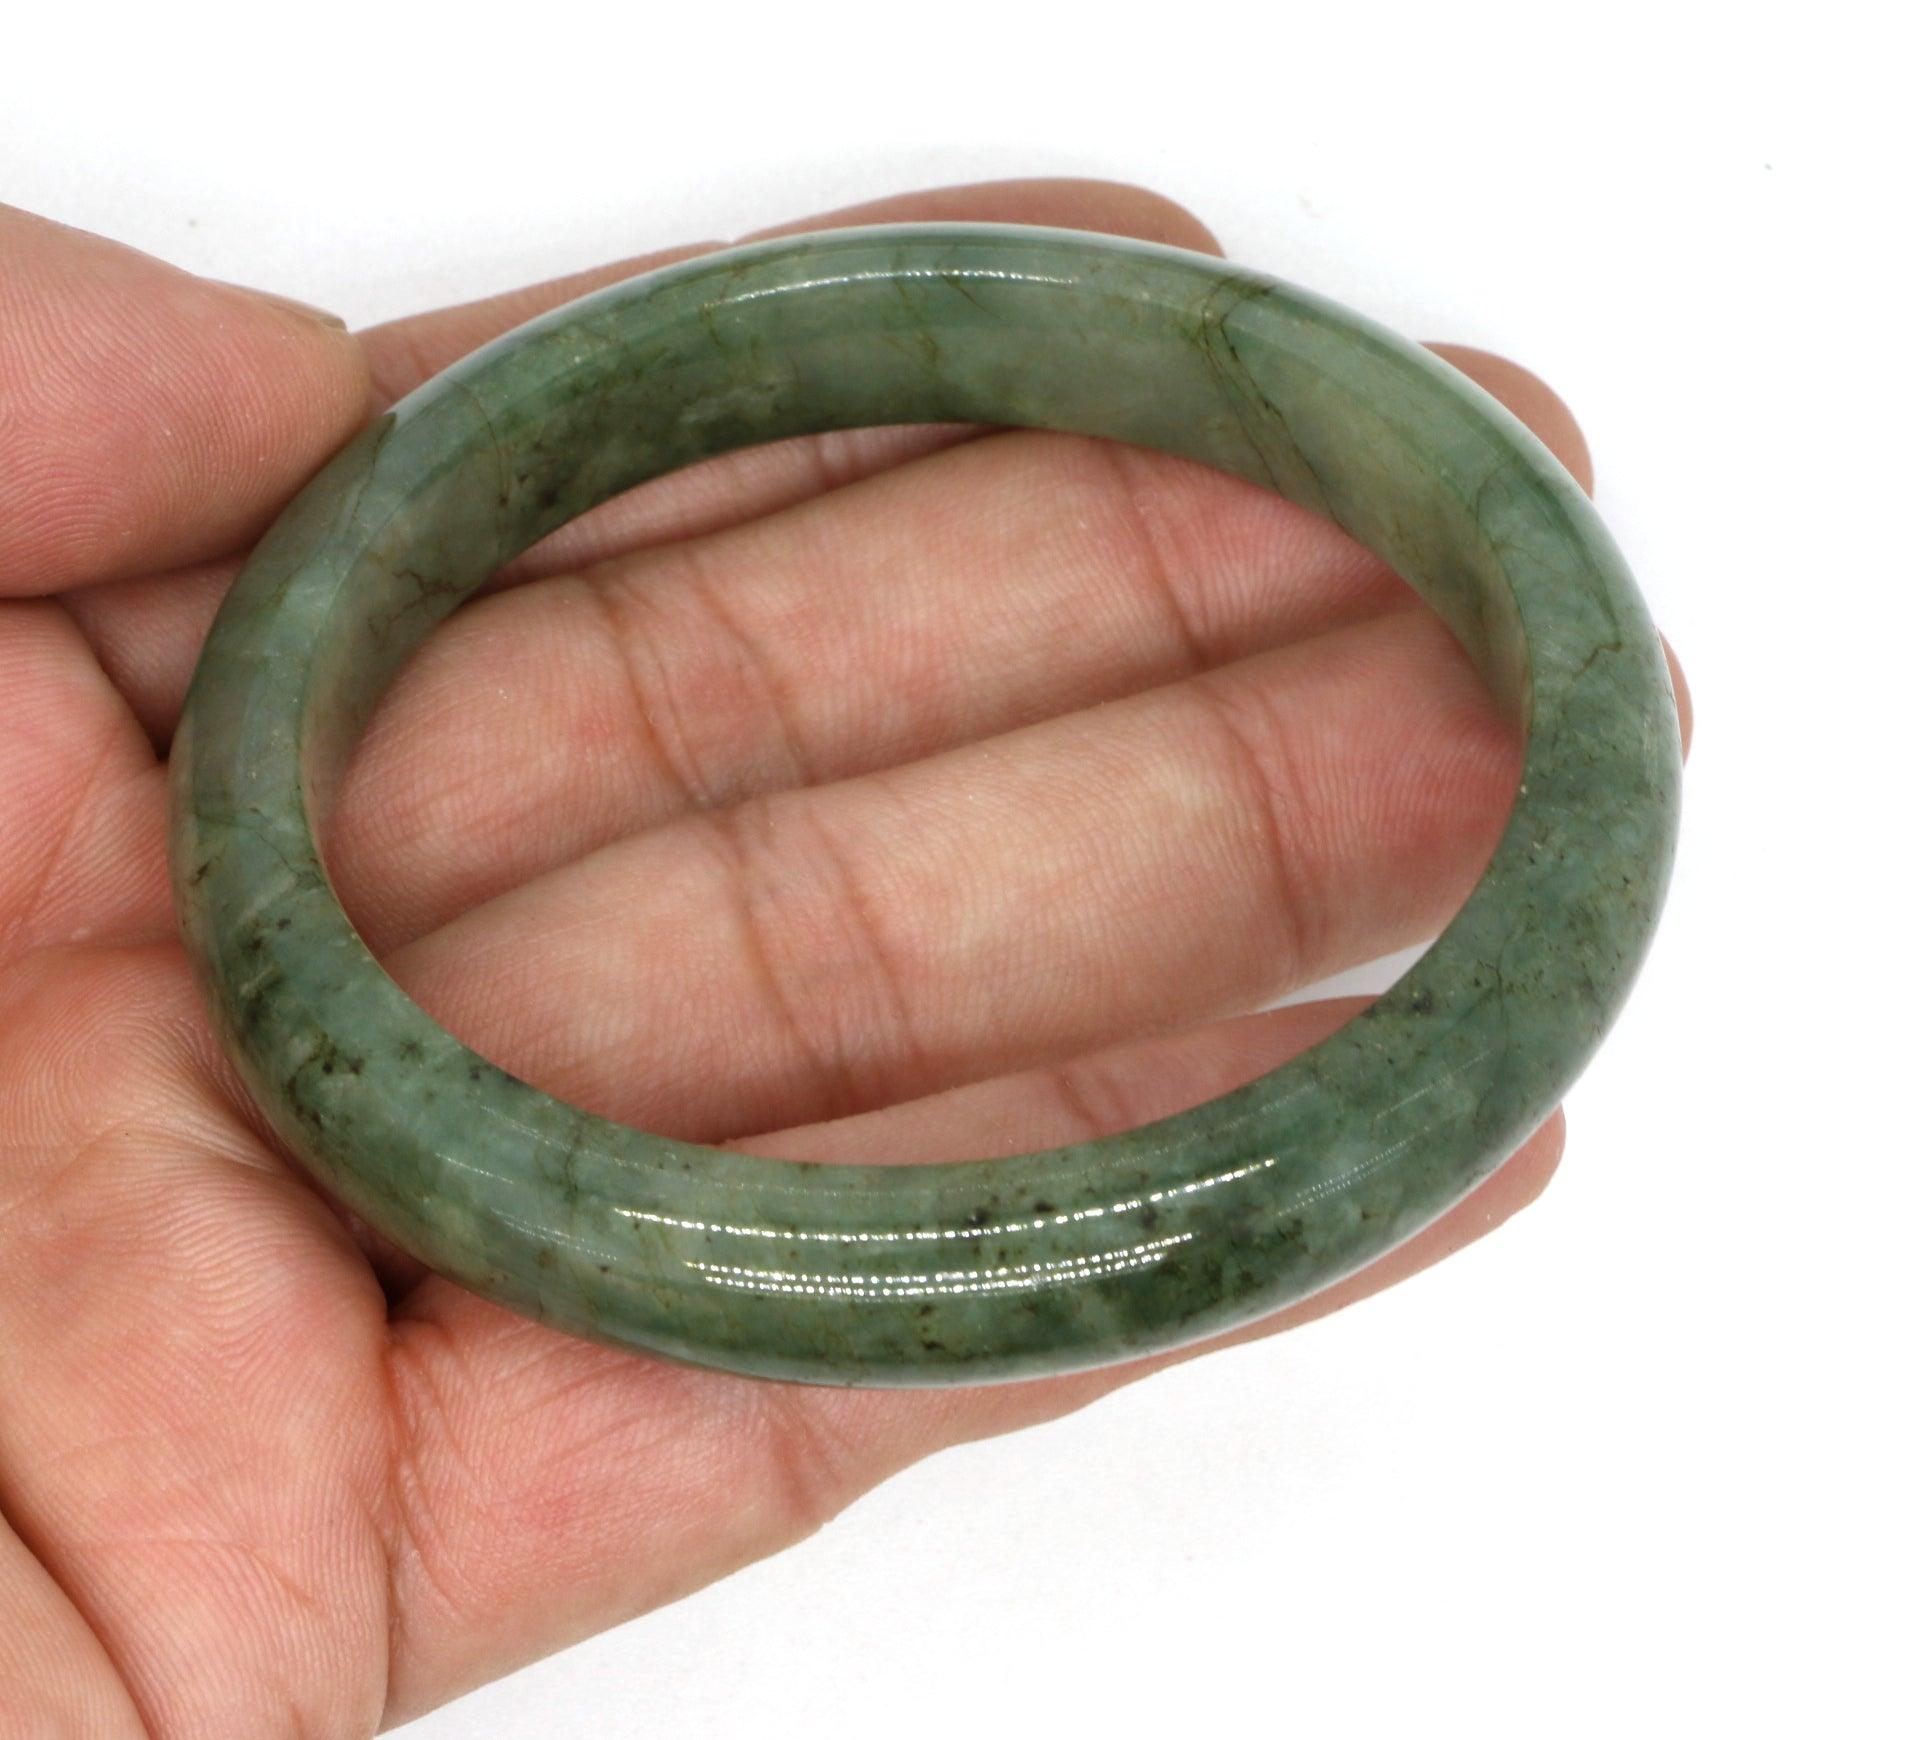 Type A Certified Jadeite Jade Bangle Size 56 -58mm B0BNFNM5Y7 - Jade-collector.com